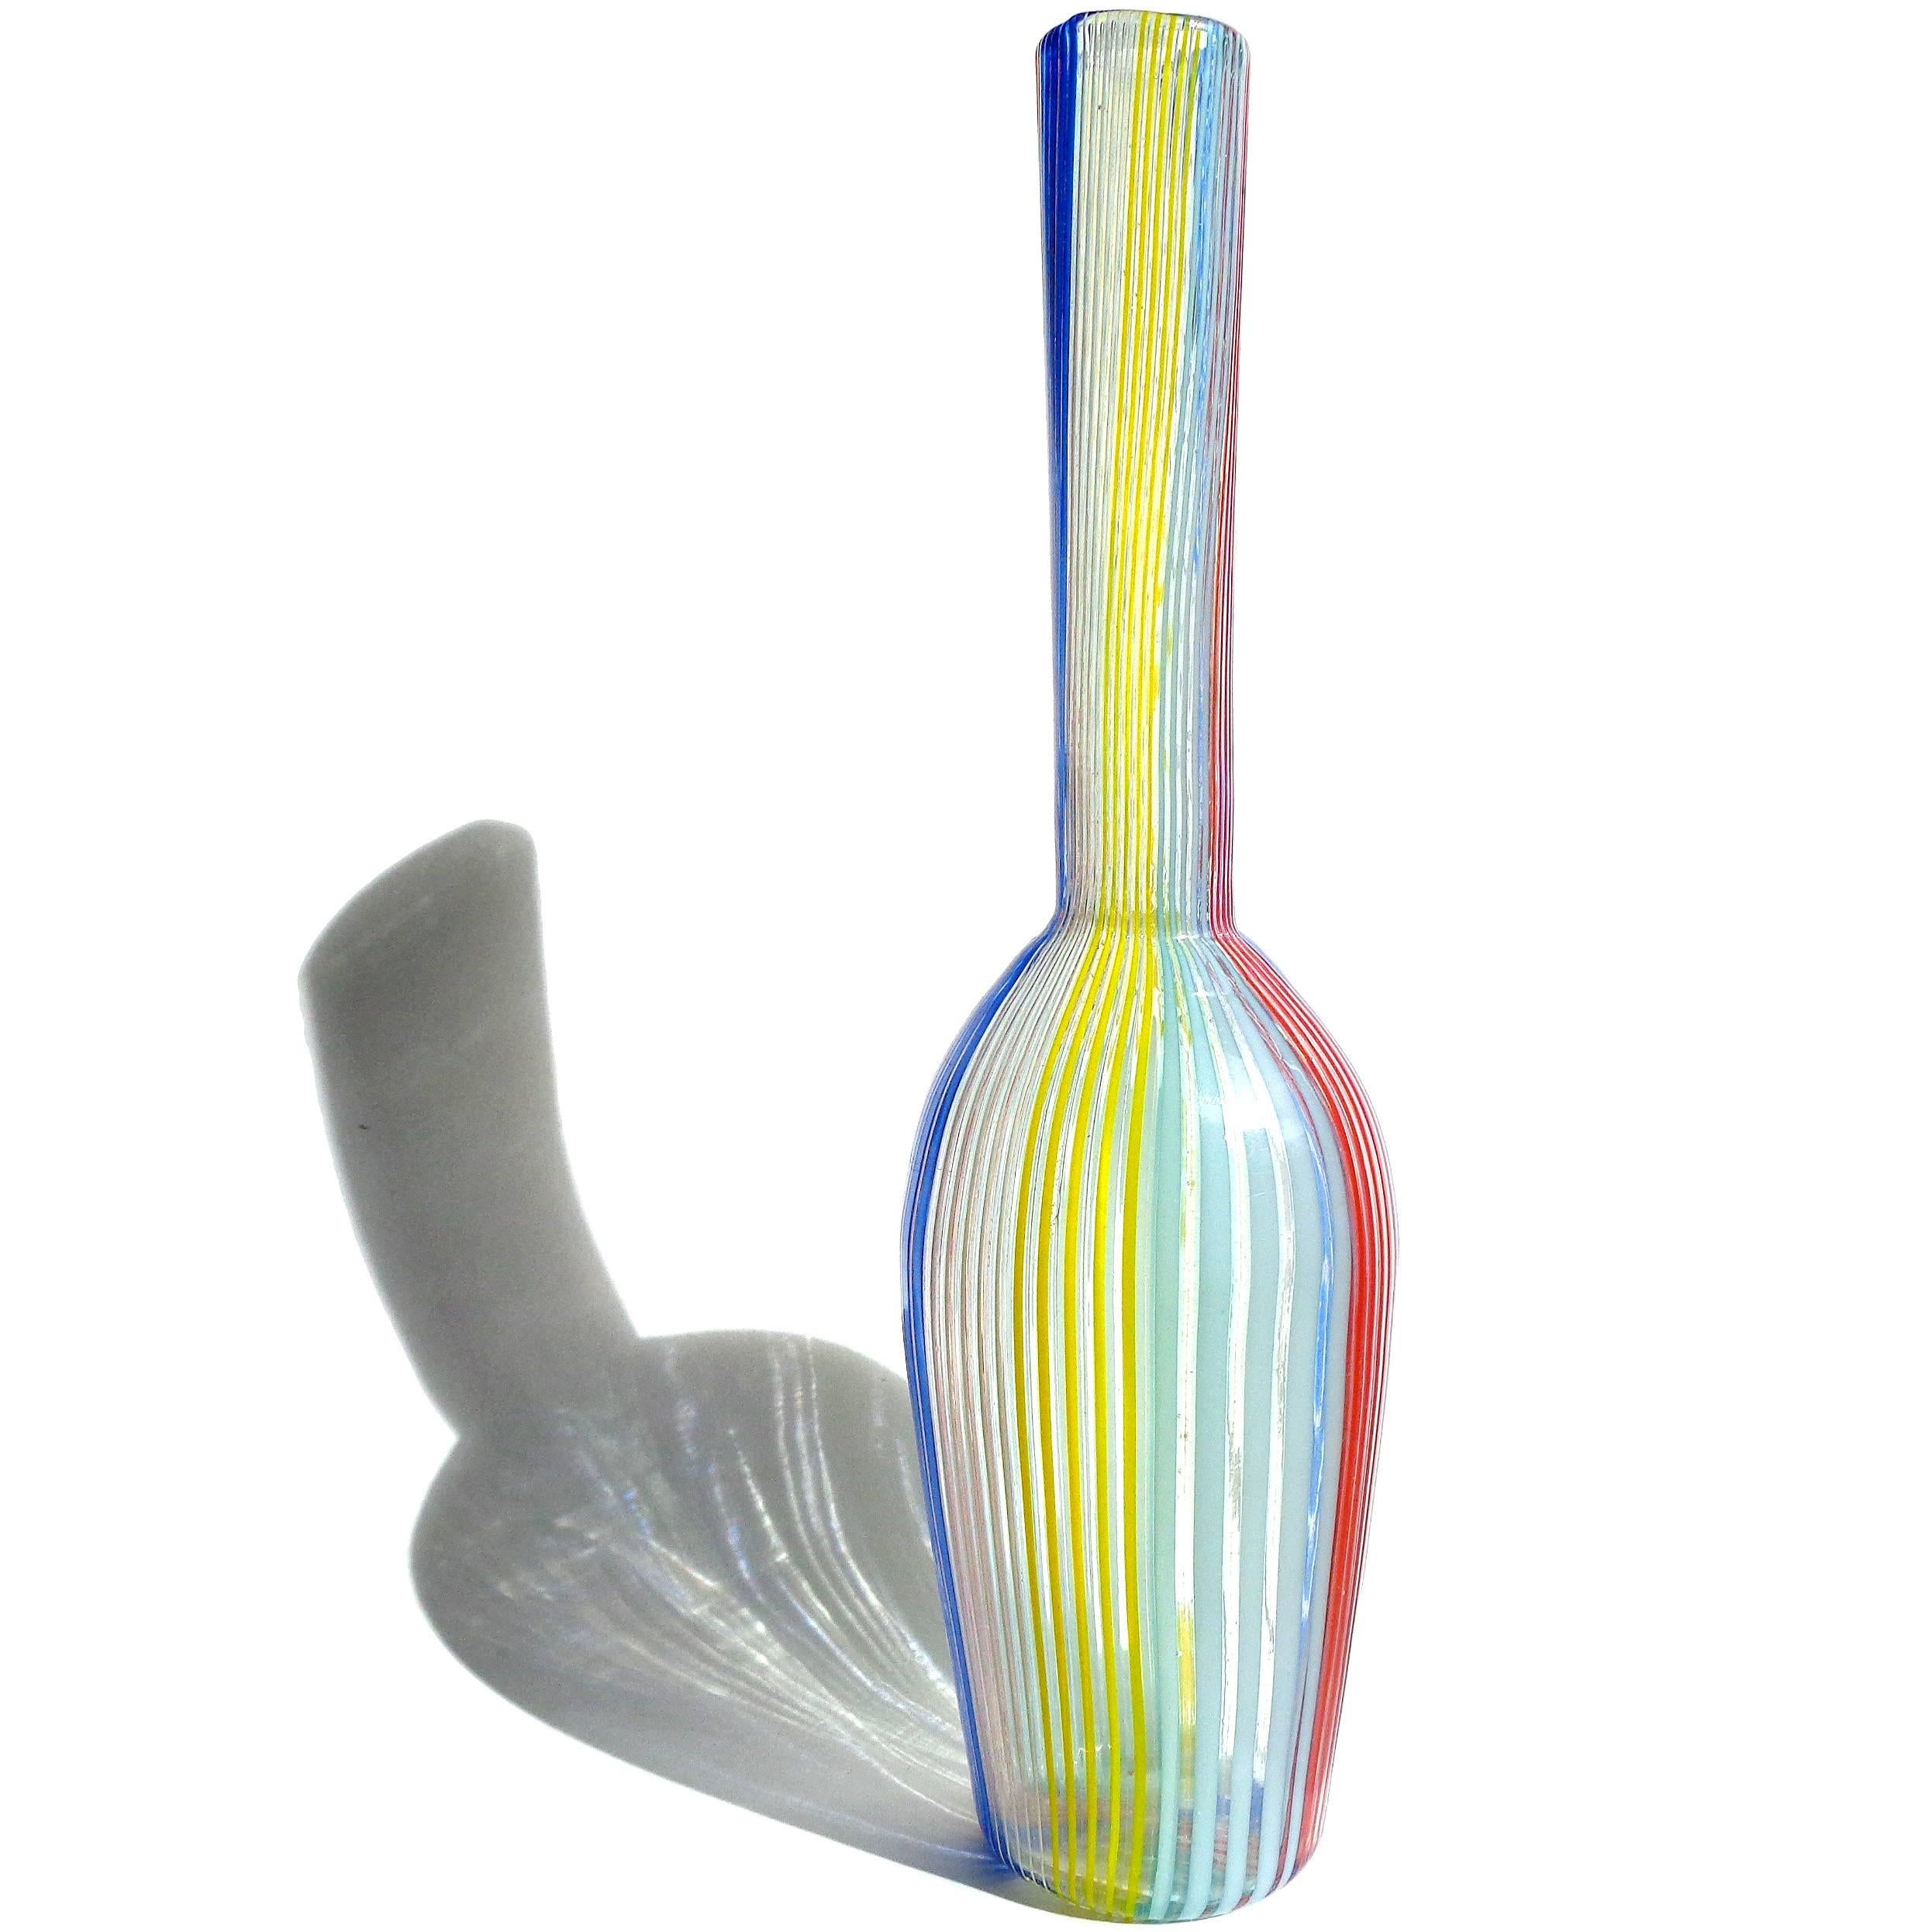 Free shipping worldwide! See details below description.

Rare and beautiful Murano handblown red, yellow, white, light blue and cobalt filigrana ribbons art glass vase. Documented to designer Dino Martens for Aureliano Toso. A similar vase is